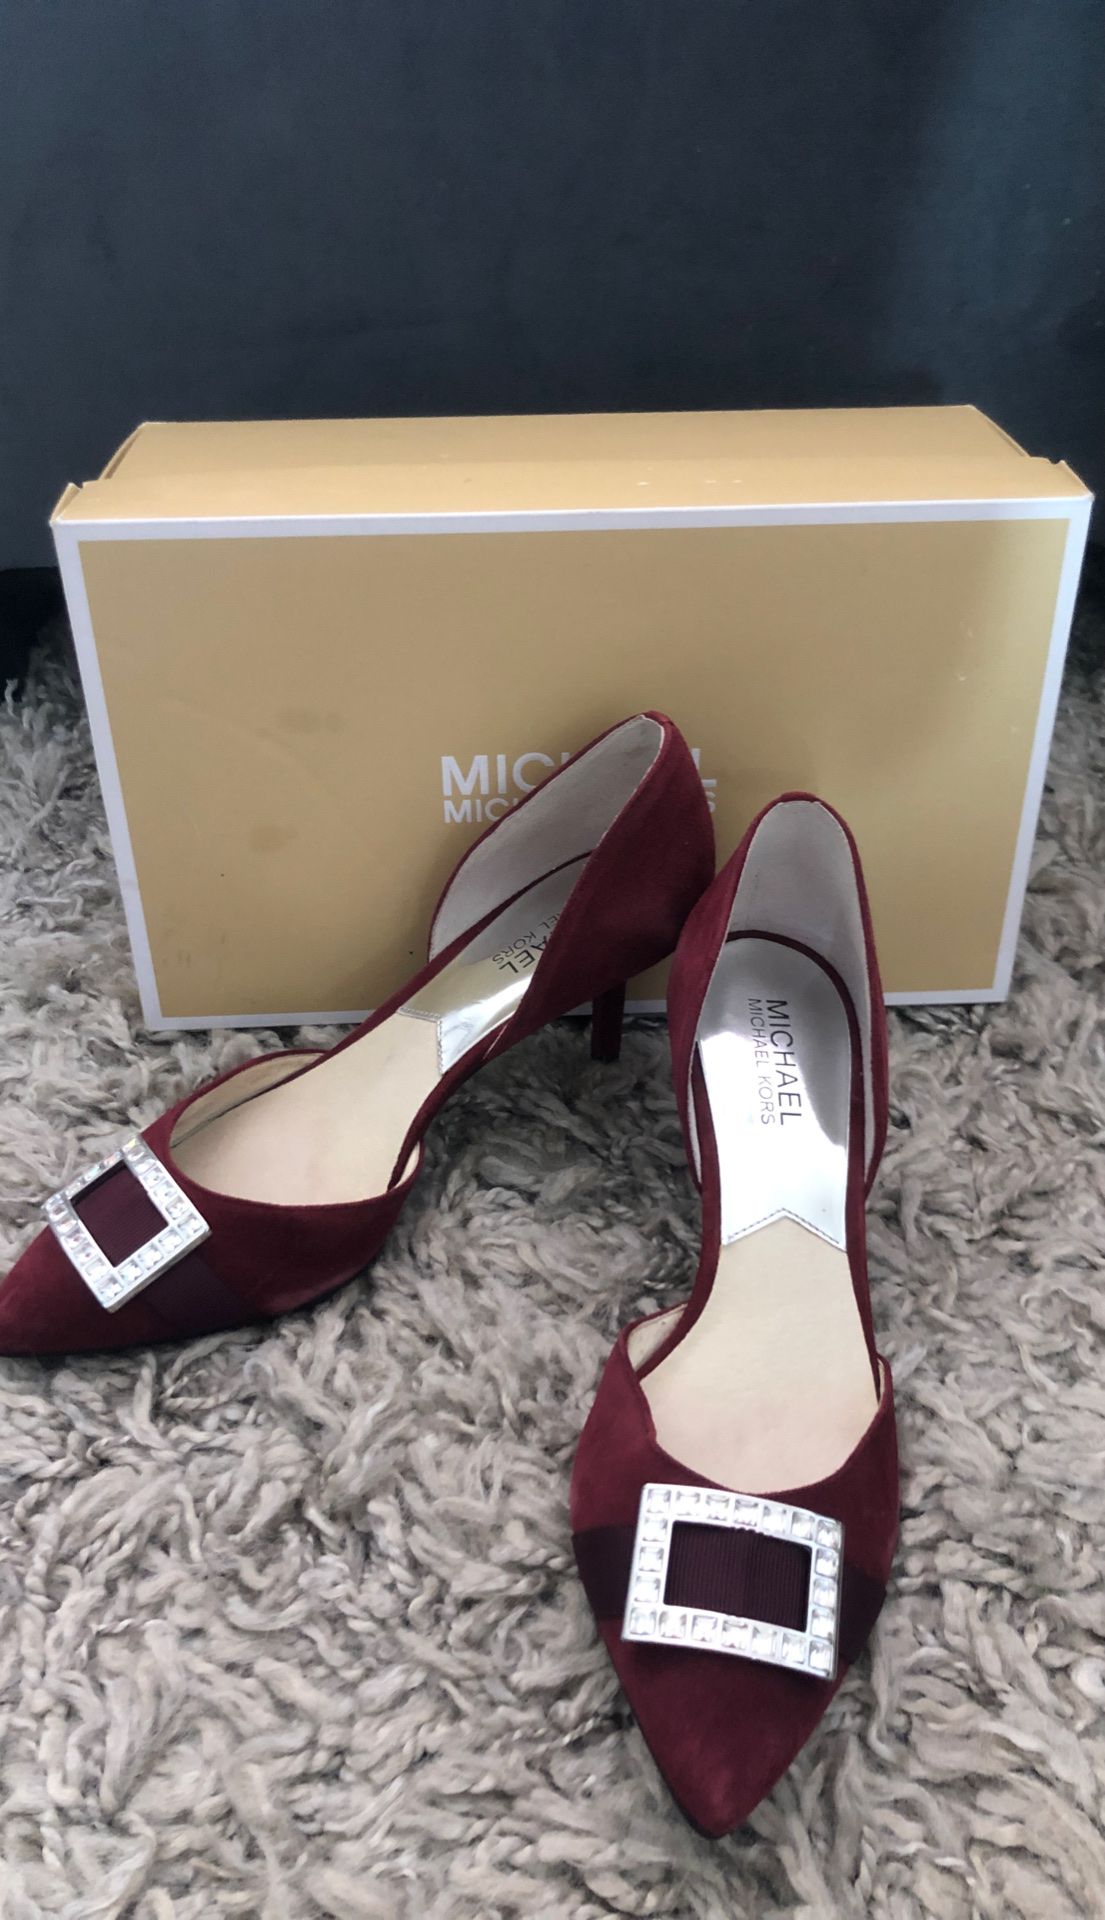 Michael KORS red suede leather heels shoes 7